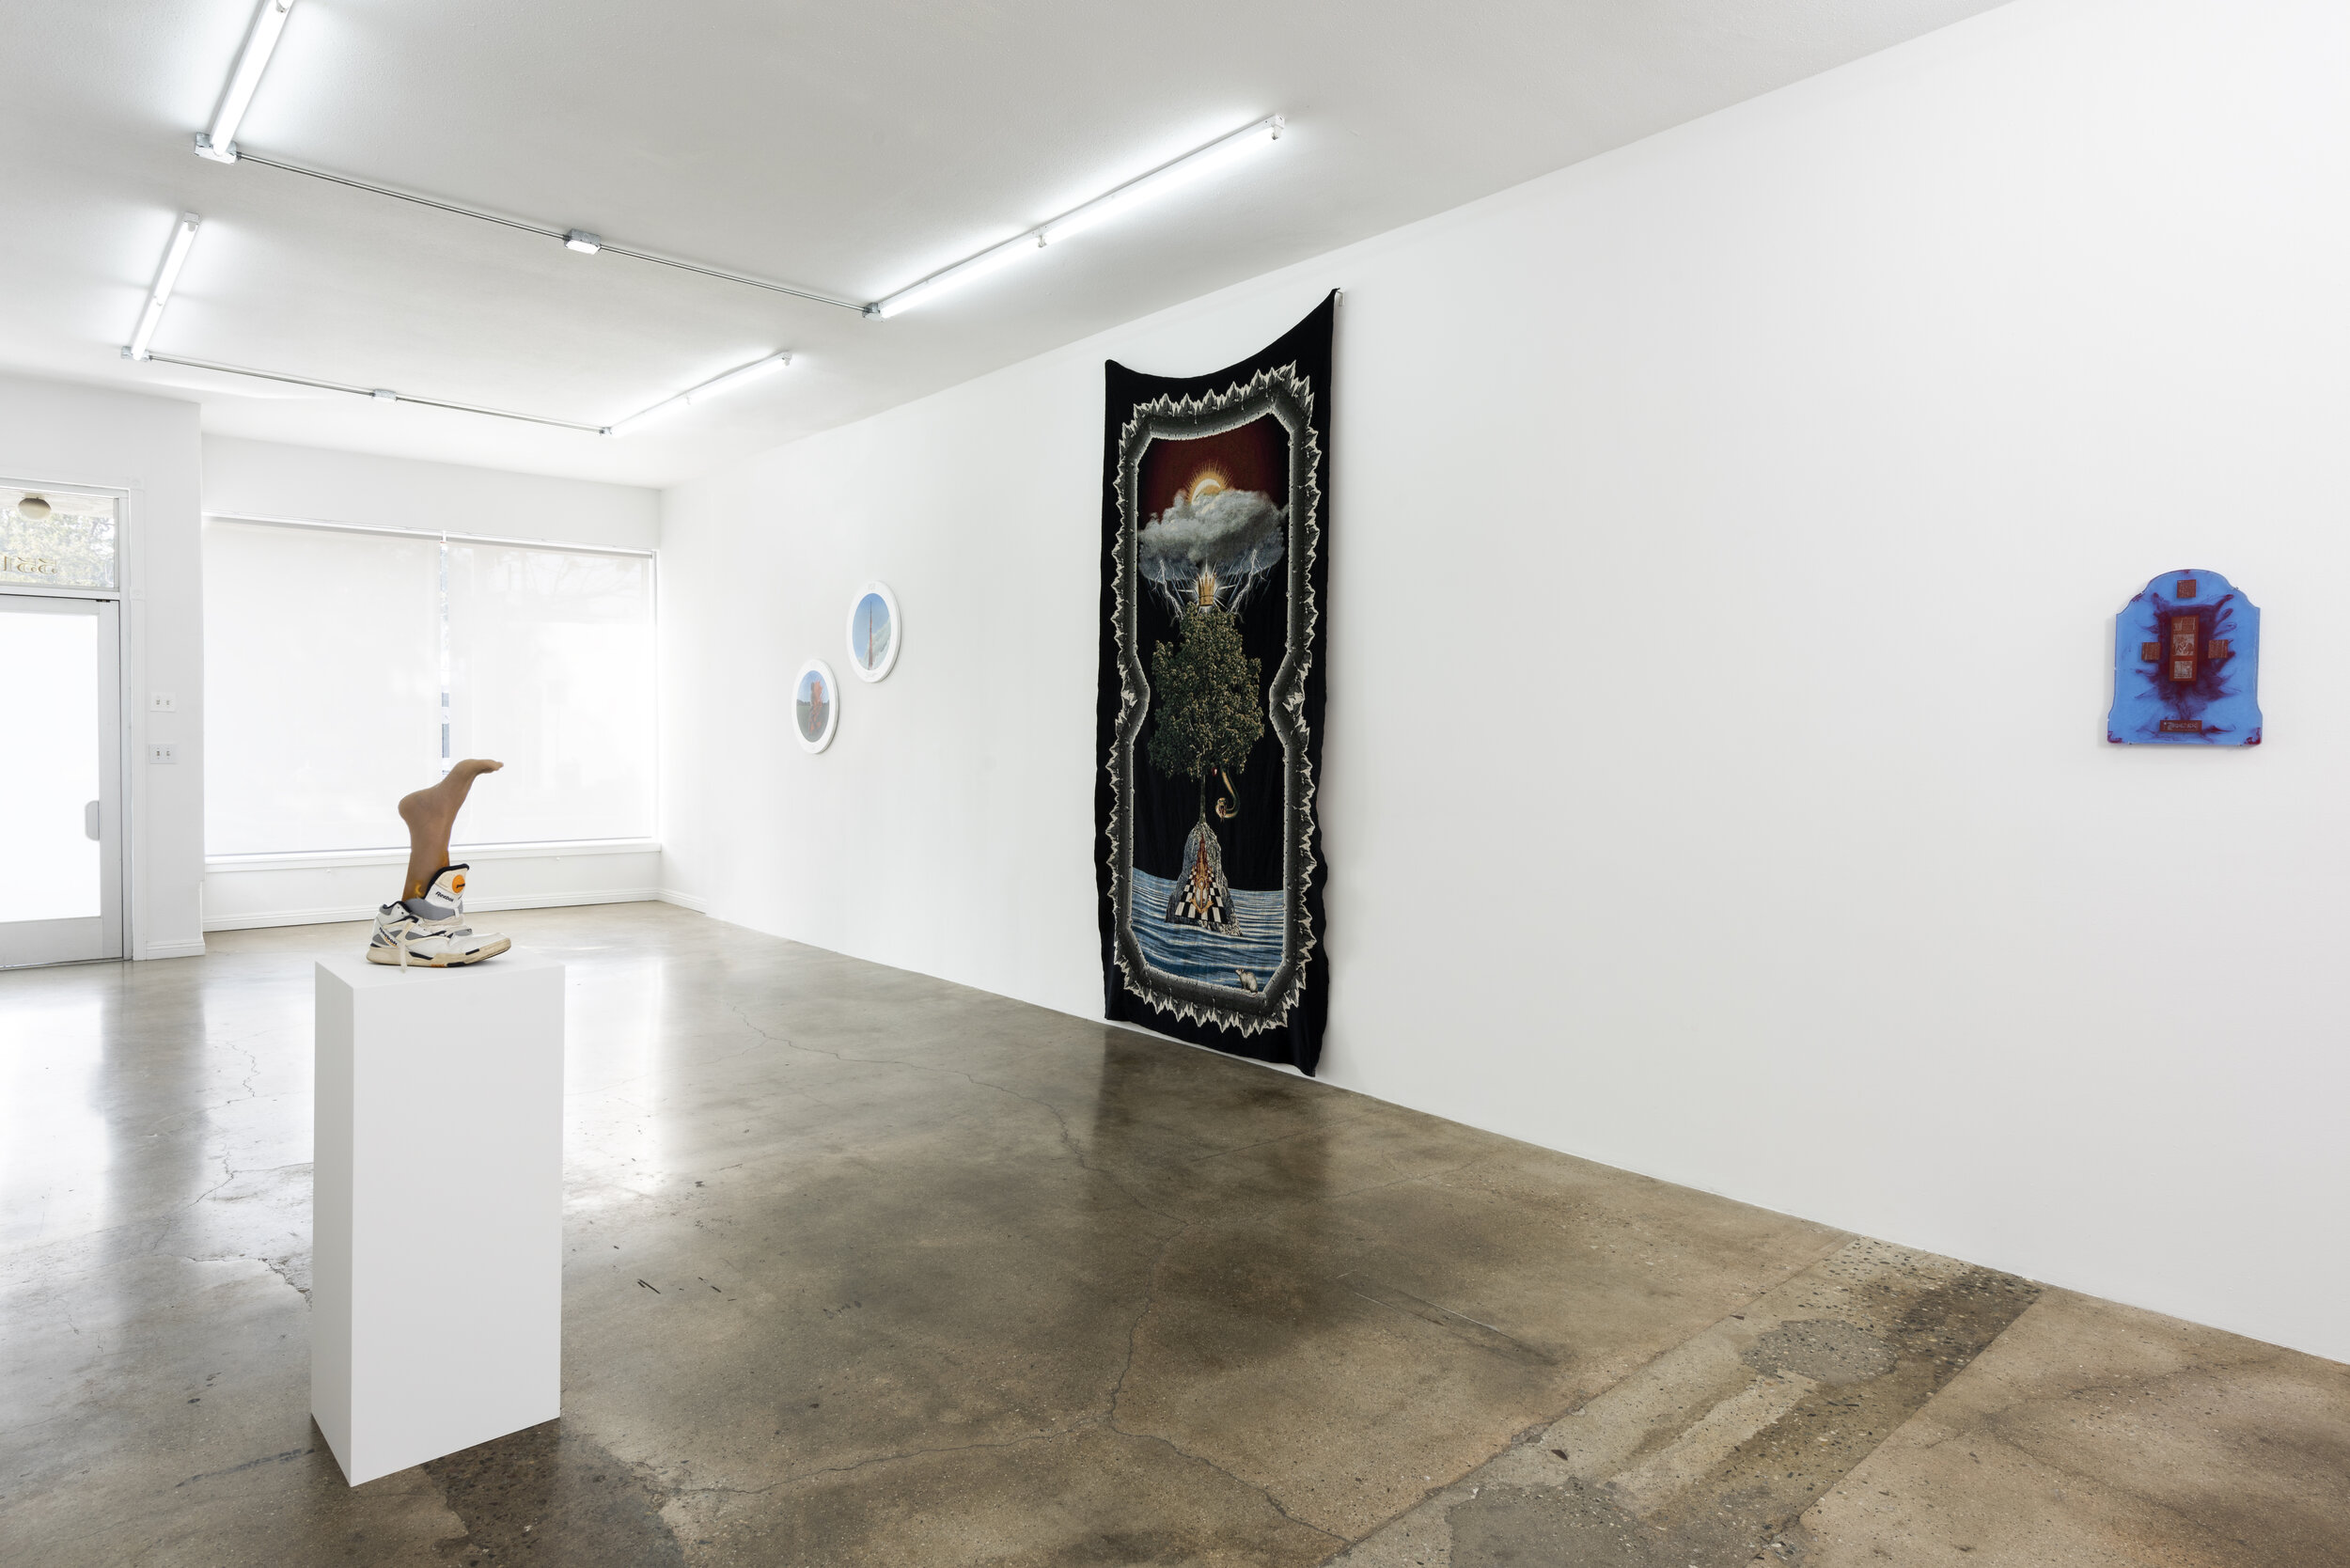  Installation view of  ”i’ll see you in the ether”  curated by Jonny Negron  November 10 - December 20, 2019  Photo by Ruben Diaz   Link to press release  